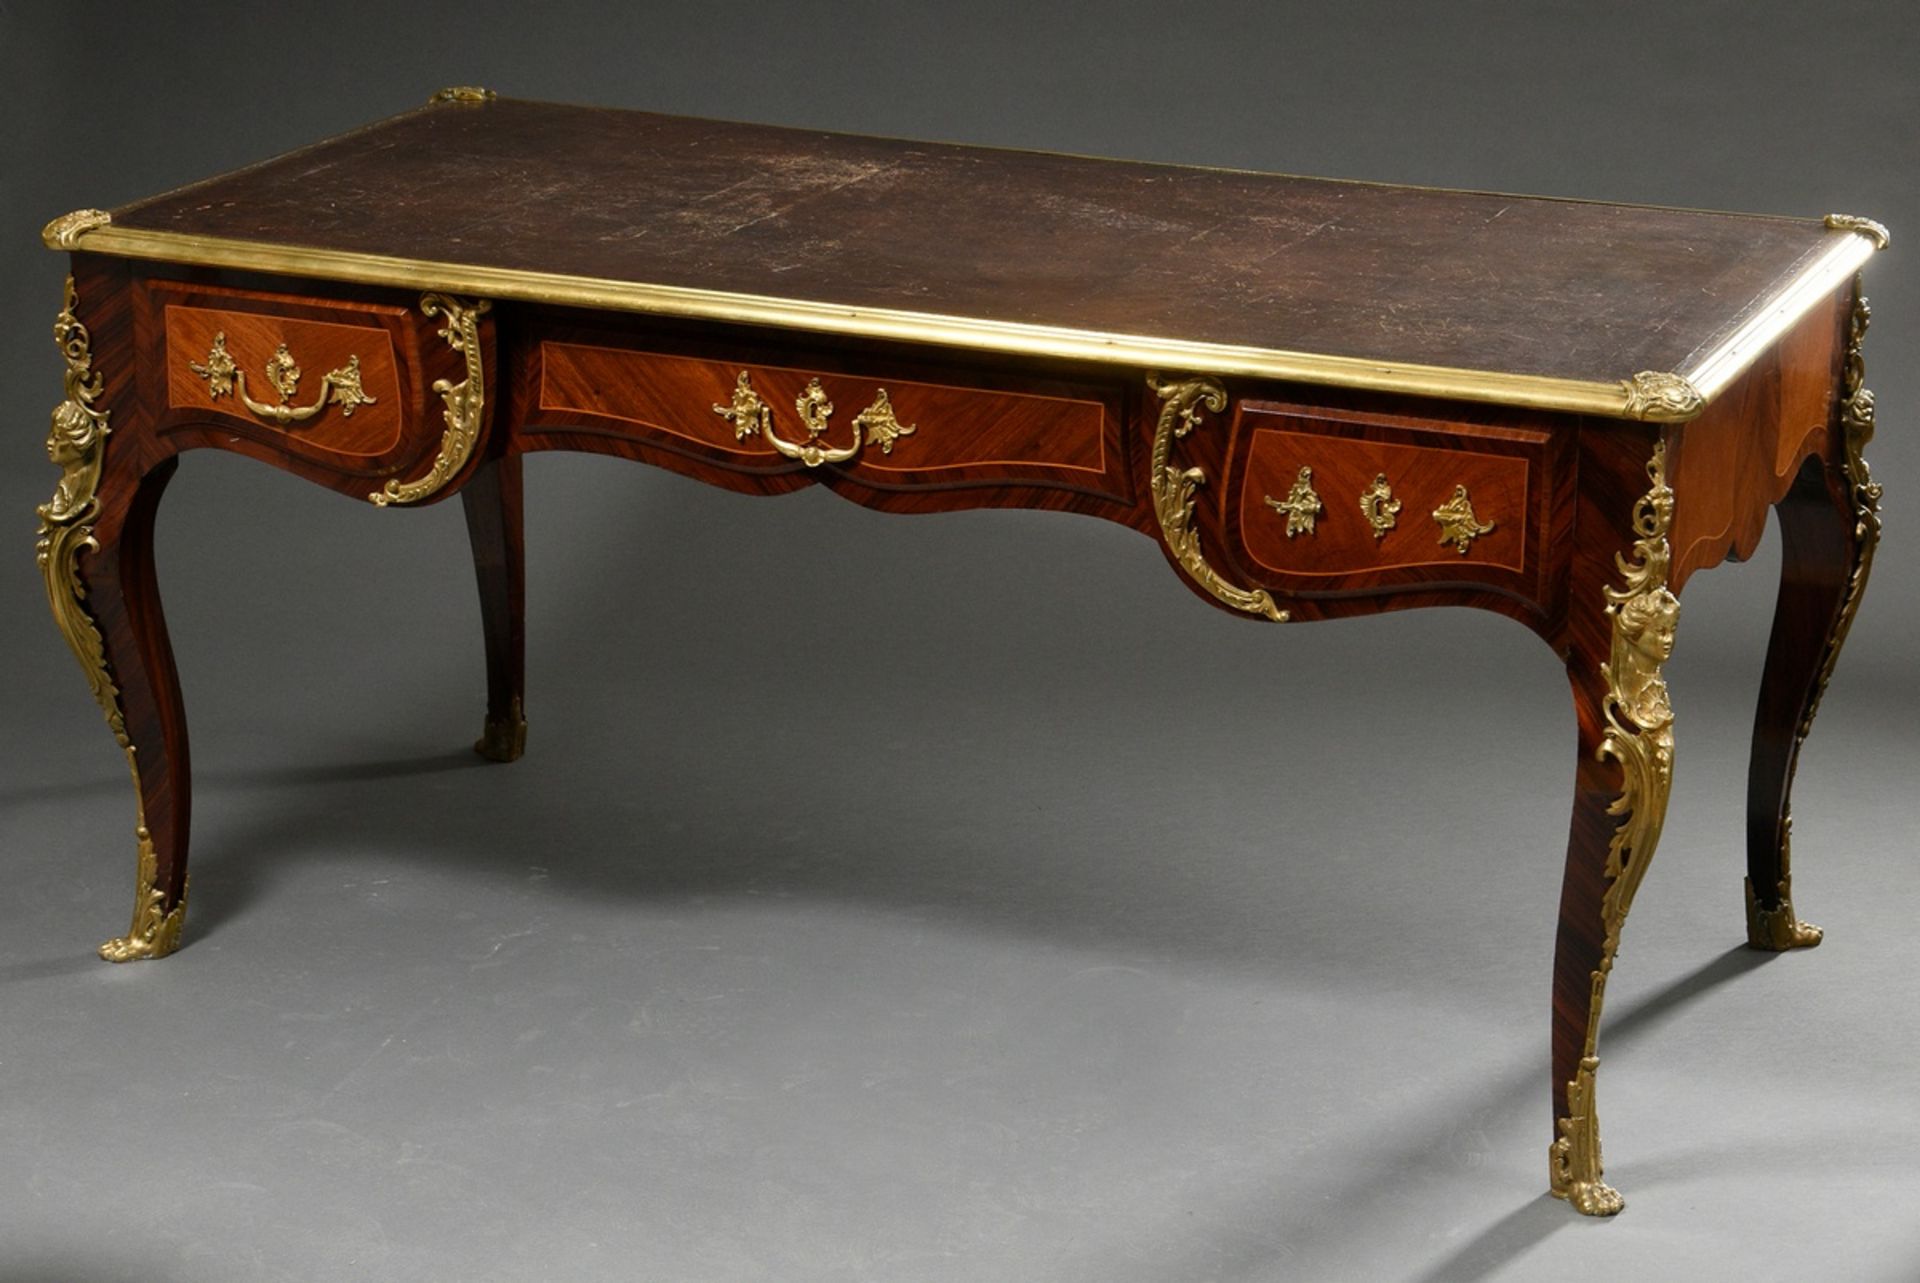 French bureau plat in Louis XV style on high curved legs with rich bronze fittings "busts of women" - Image 9 of 10